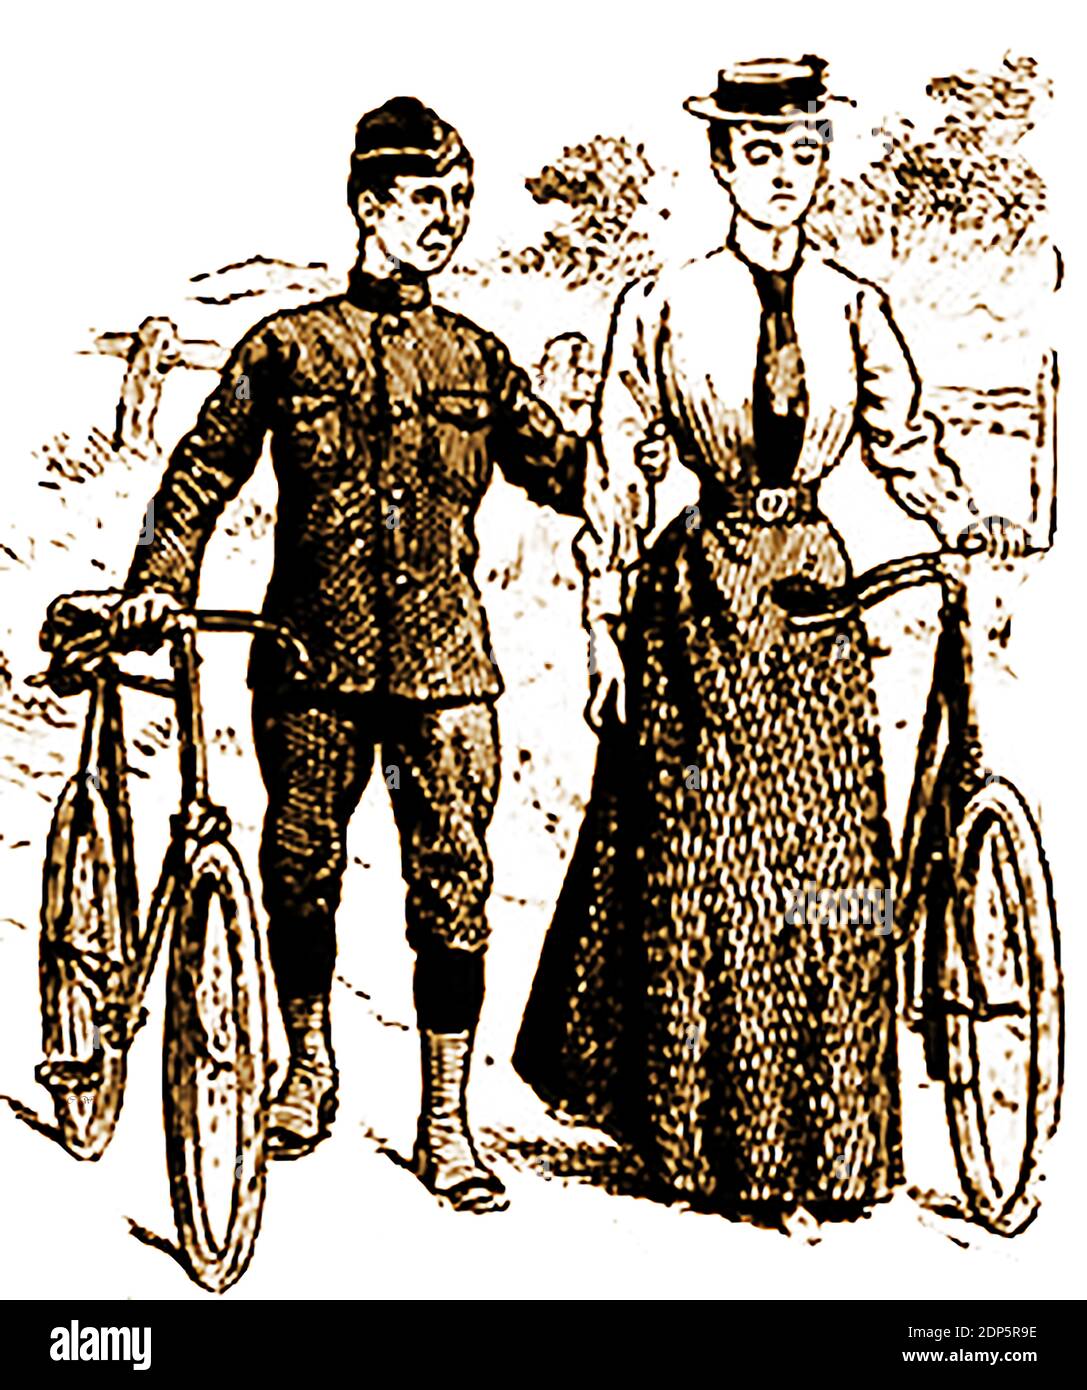 Britain in 1900. Police Bikes The use of bicycles by the Police  (including tricycles) began in the late 1890s. Cycles enabled the policeman to patrol  in both towns and the countryside.  Women on cycles were seen as 'un-ladylike' and  the newly formed cycle police often arrested  them  for dangerous cycling to discourage them. Stock Photo